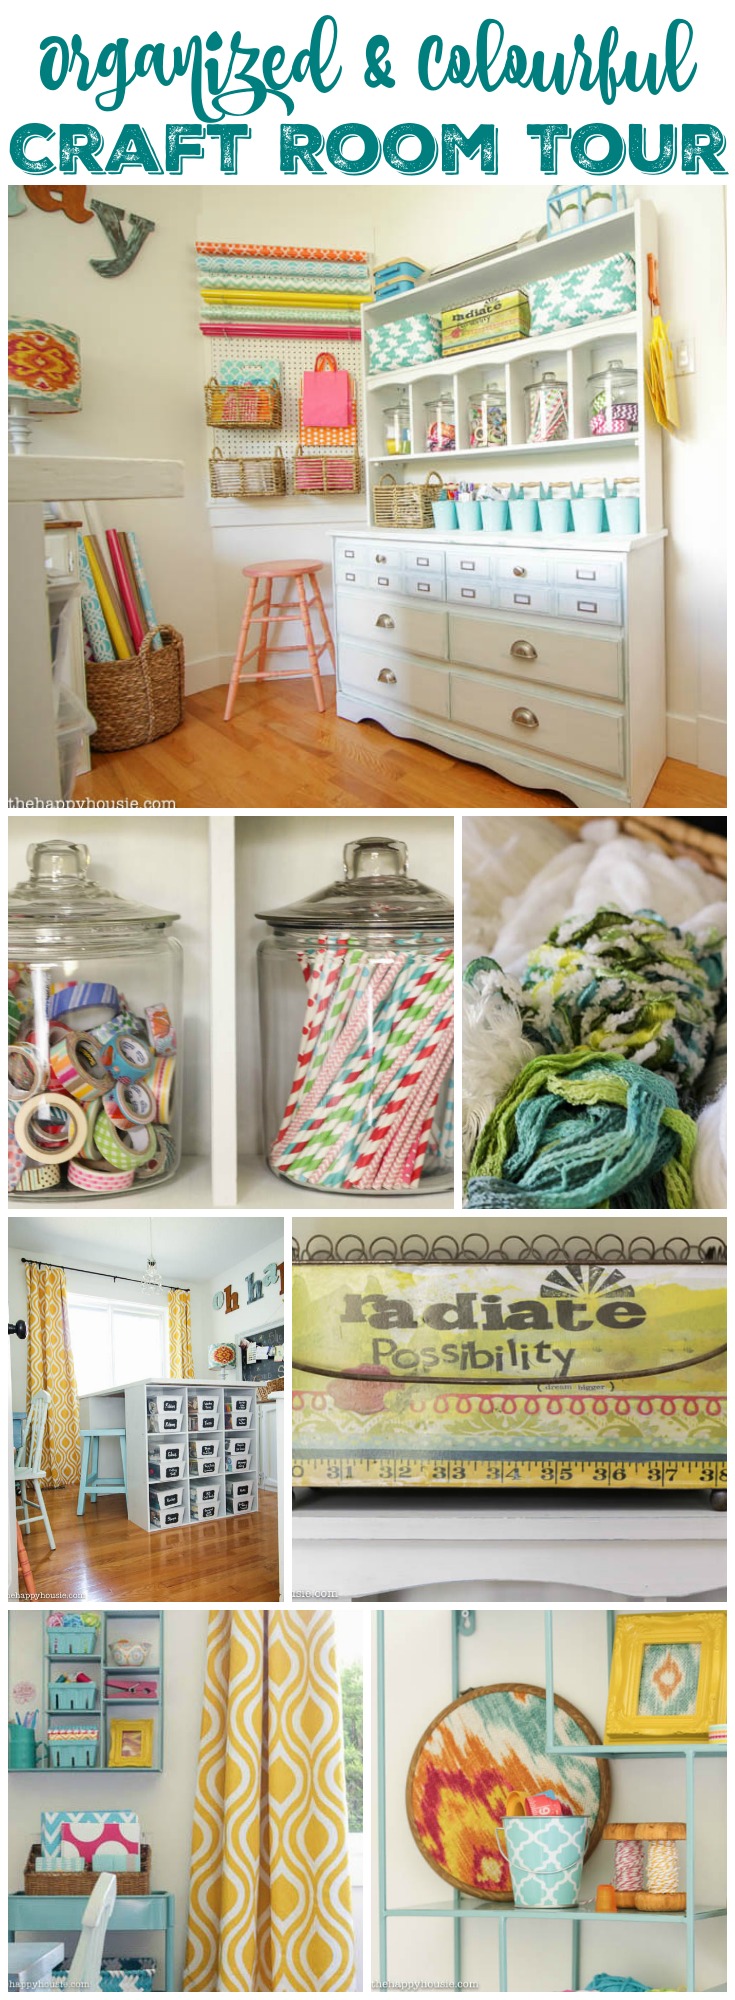 Organized & Colourful Craft Room Tour at thehappyhousie.com